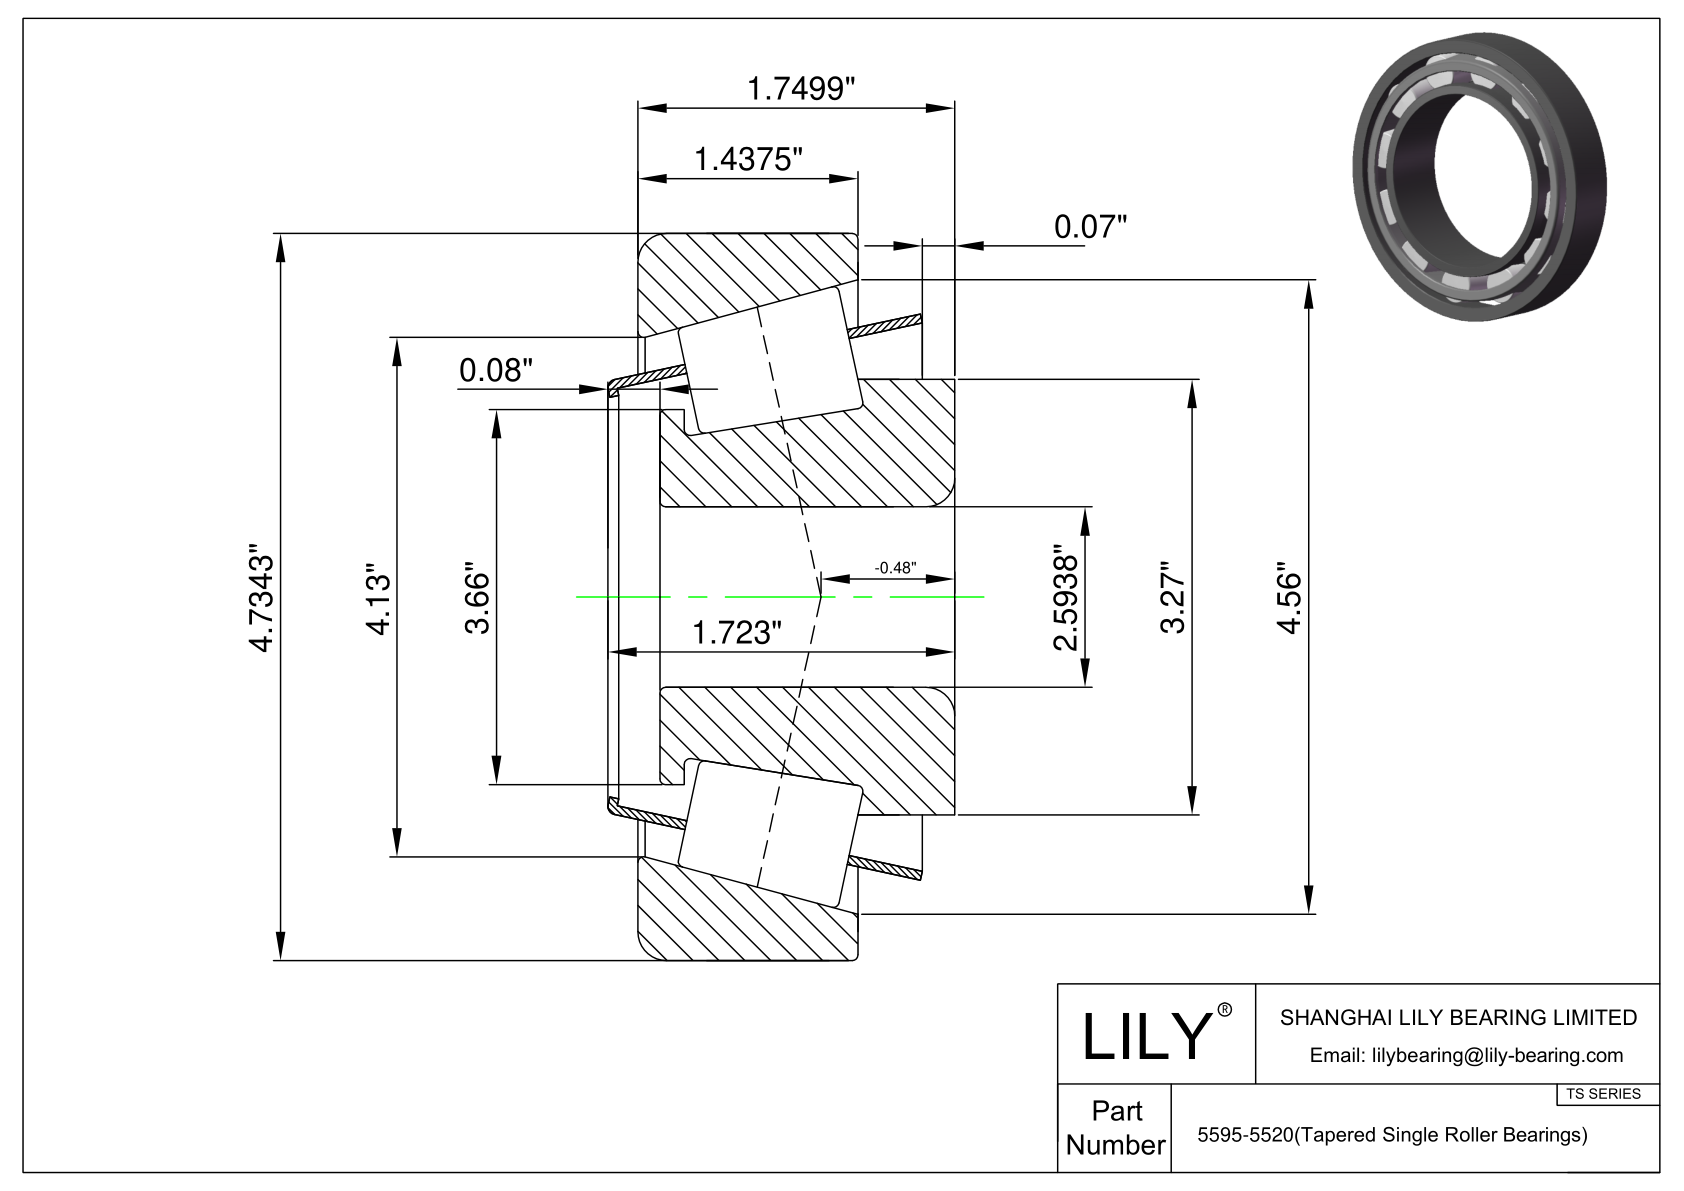 5595-5520 TS (Tapered Single Roller Bearings) (Imperial) cad drawing